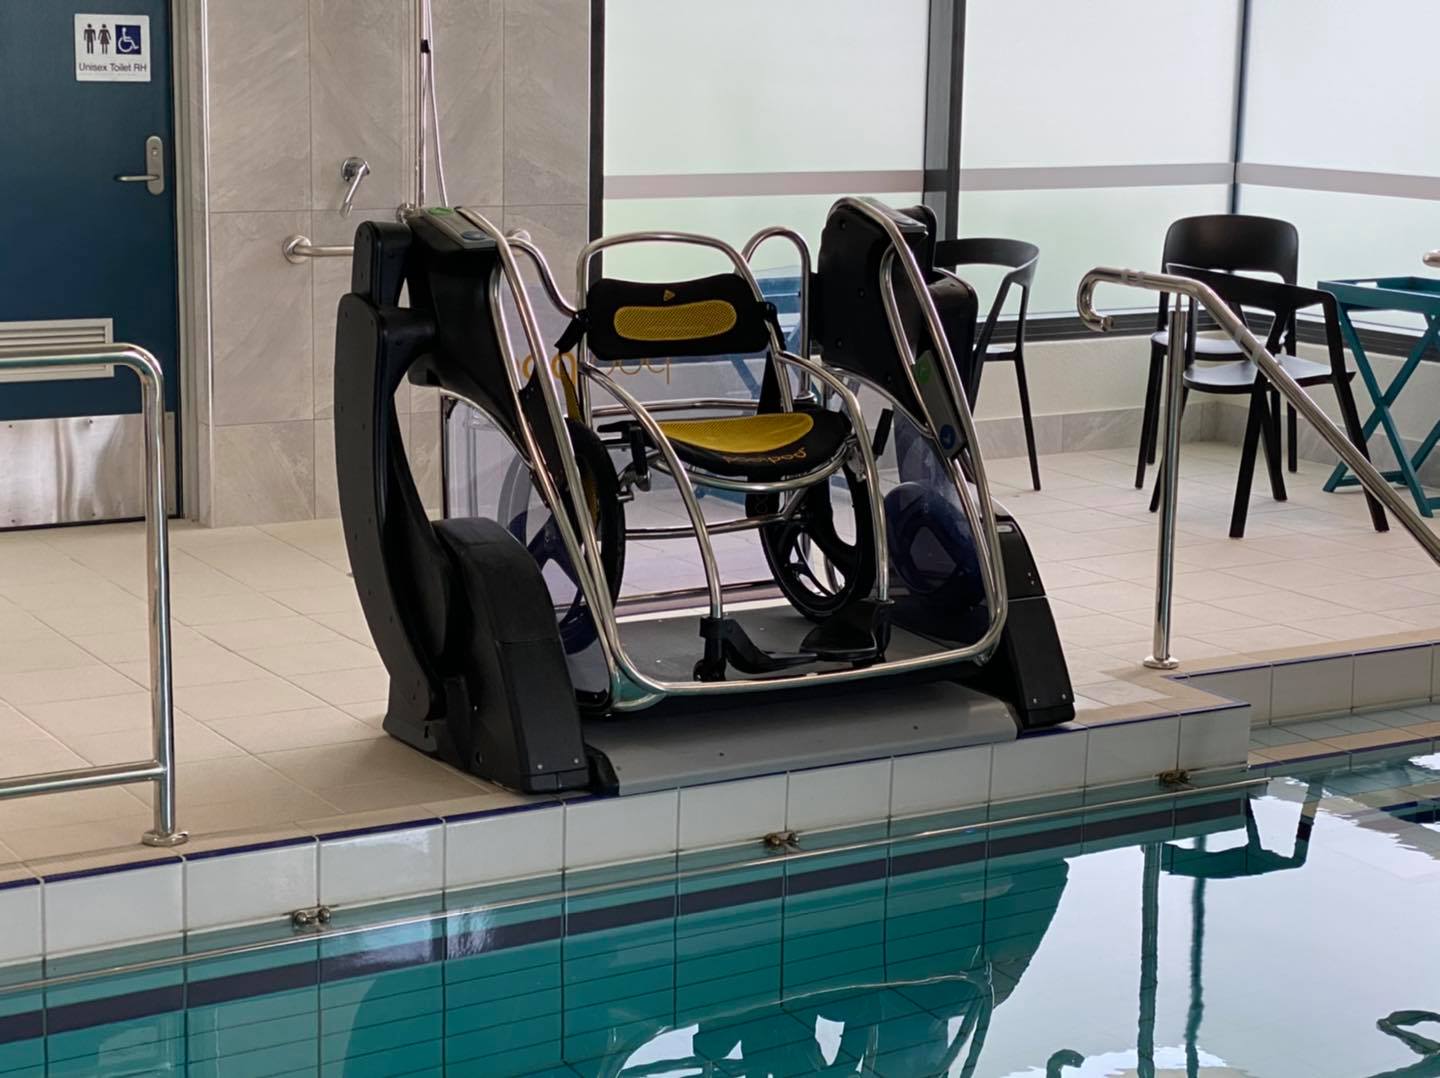 Disability access to recovery pool